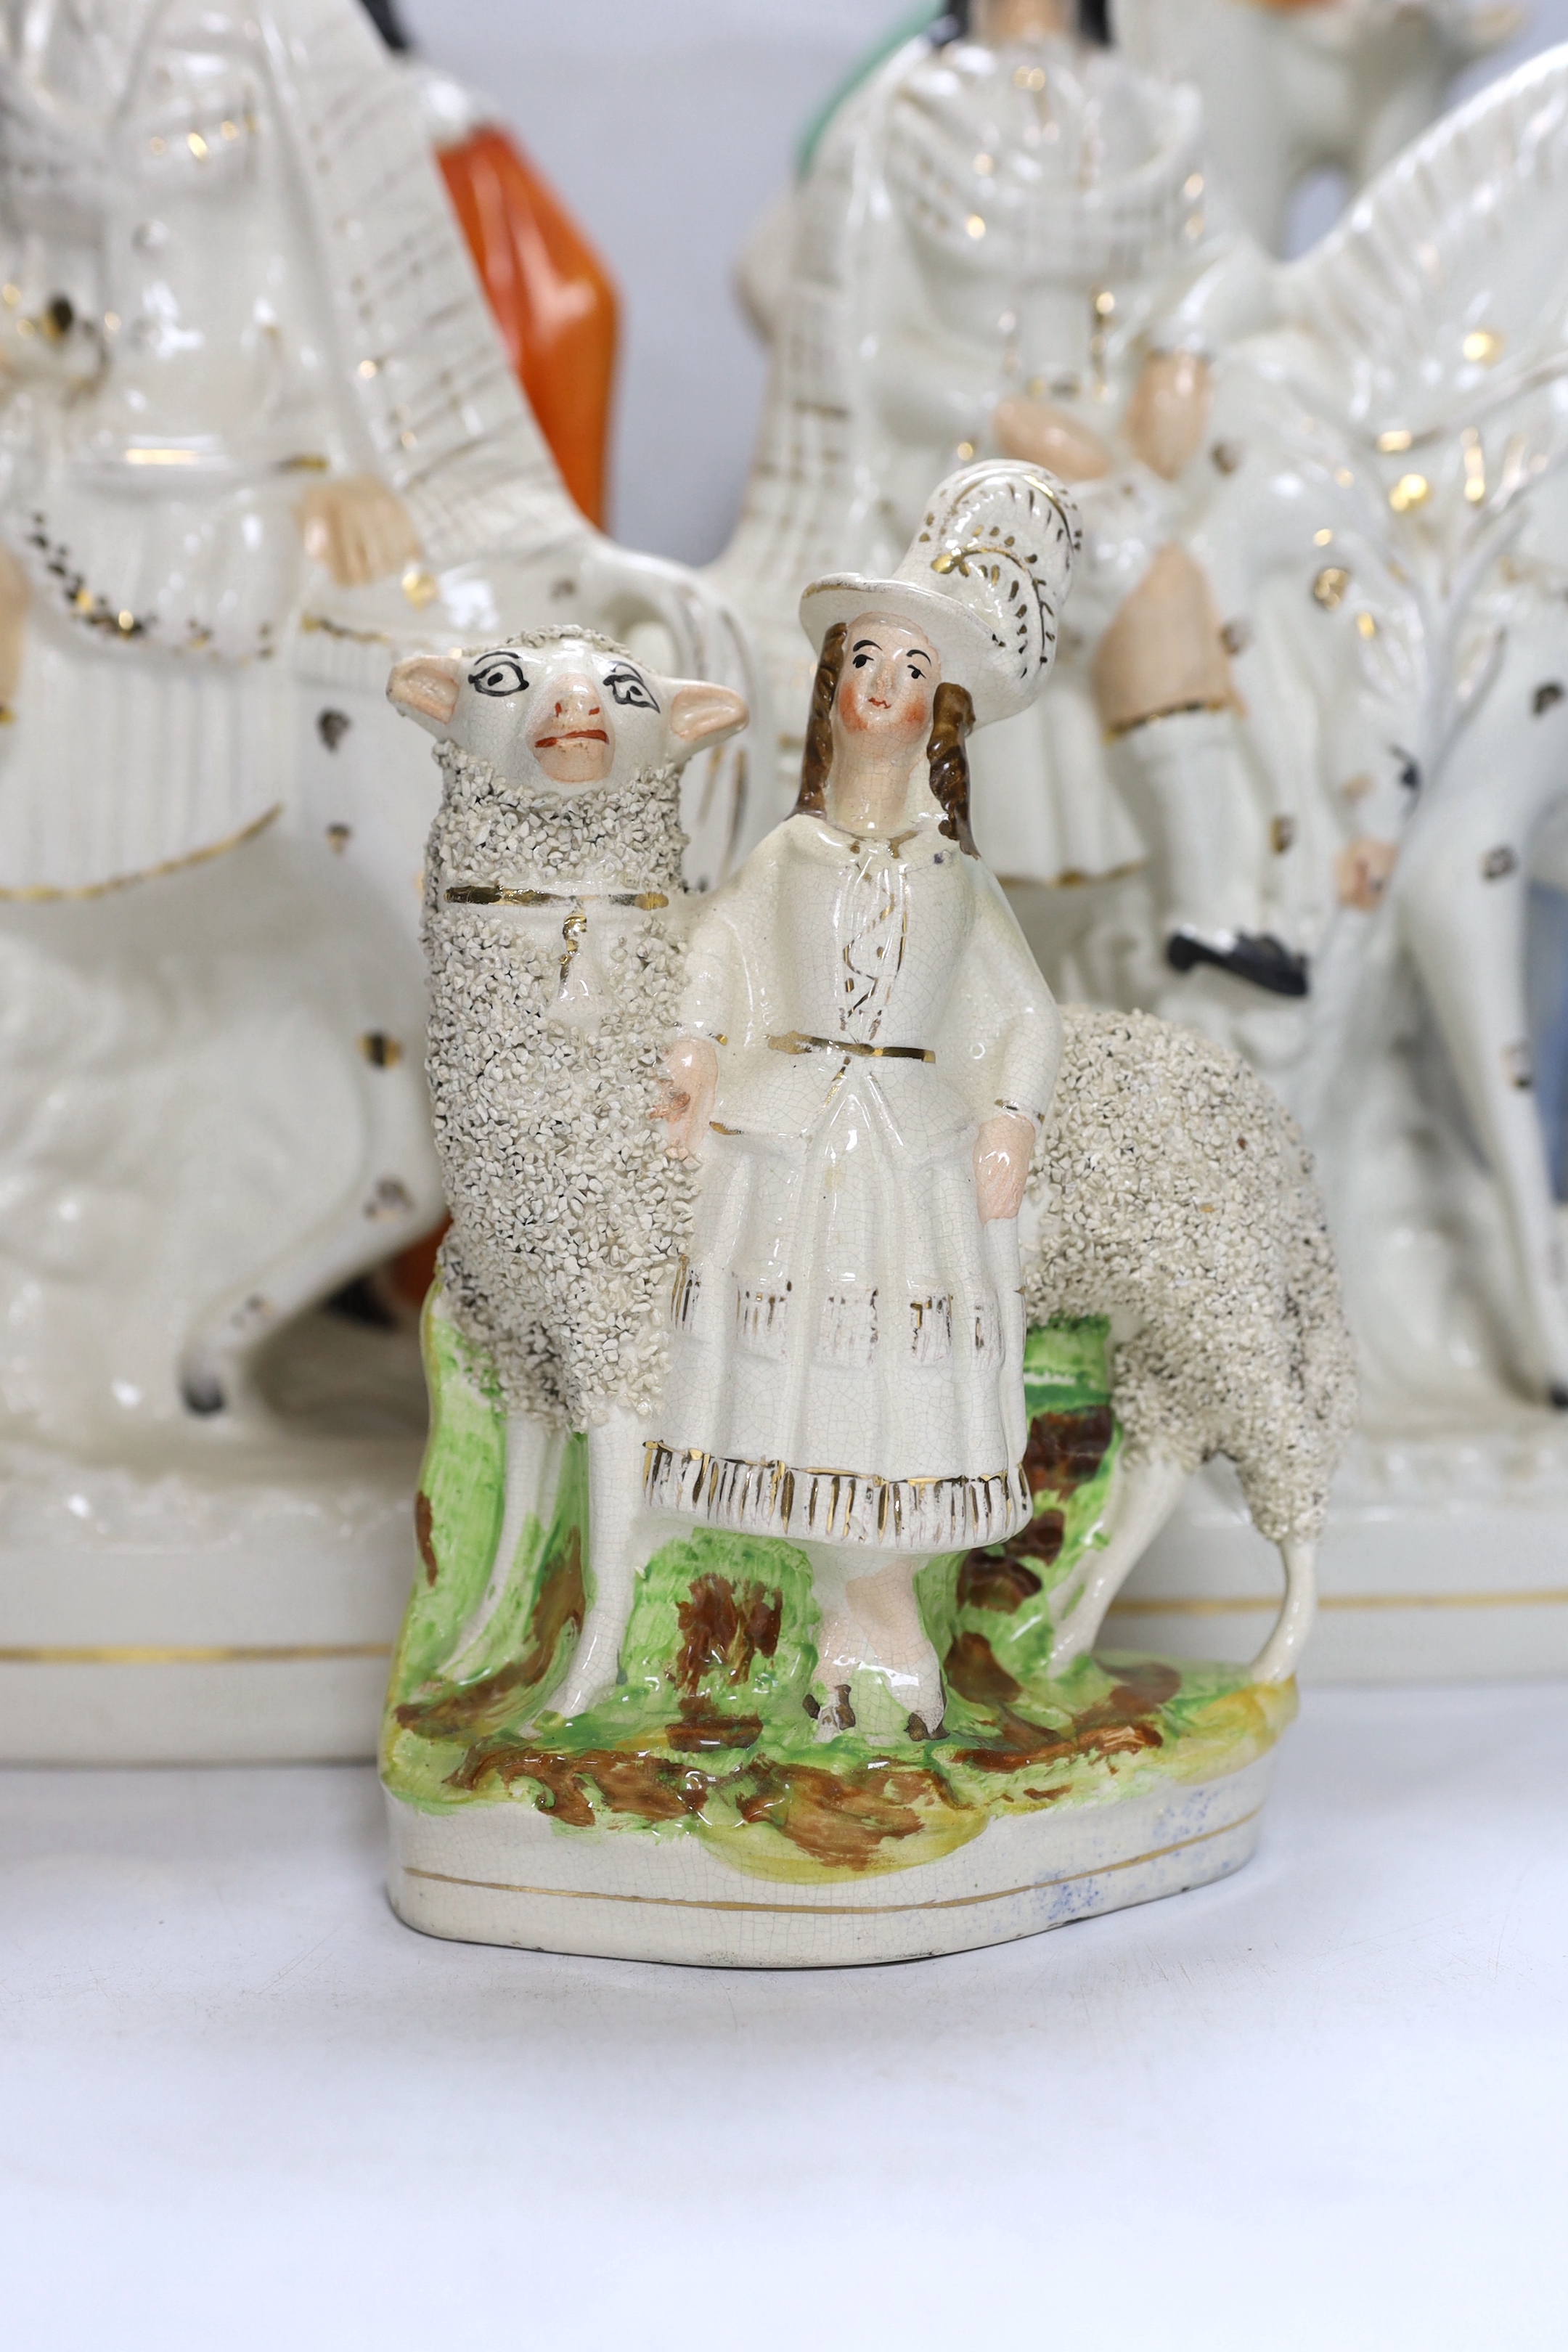 A pair of large mid 19th century Staffordshire pottery highland hunters, on horseback and three other Staffordshire pottery groups, largest 44 cm high (5)